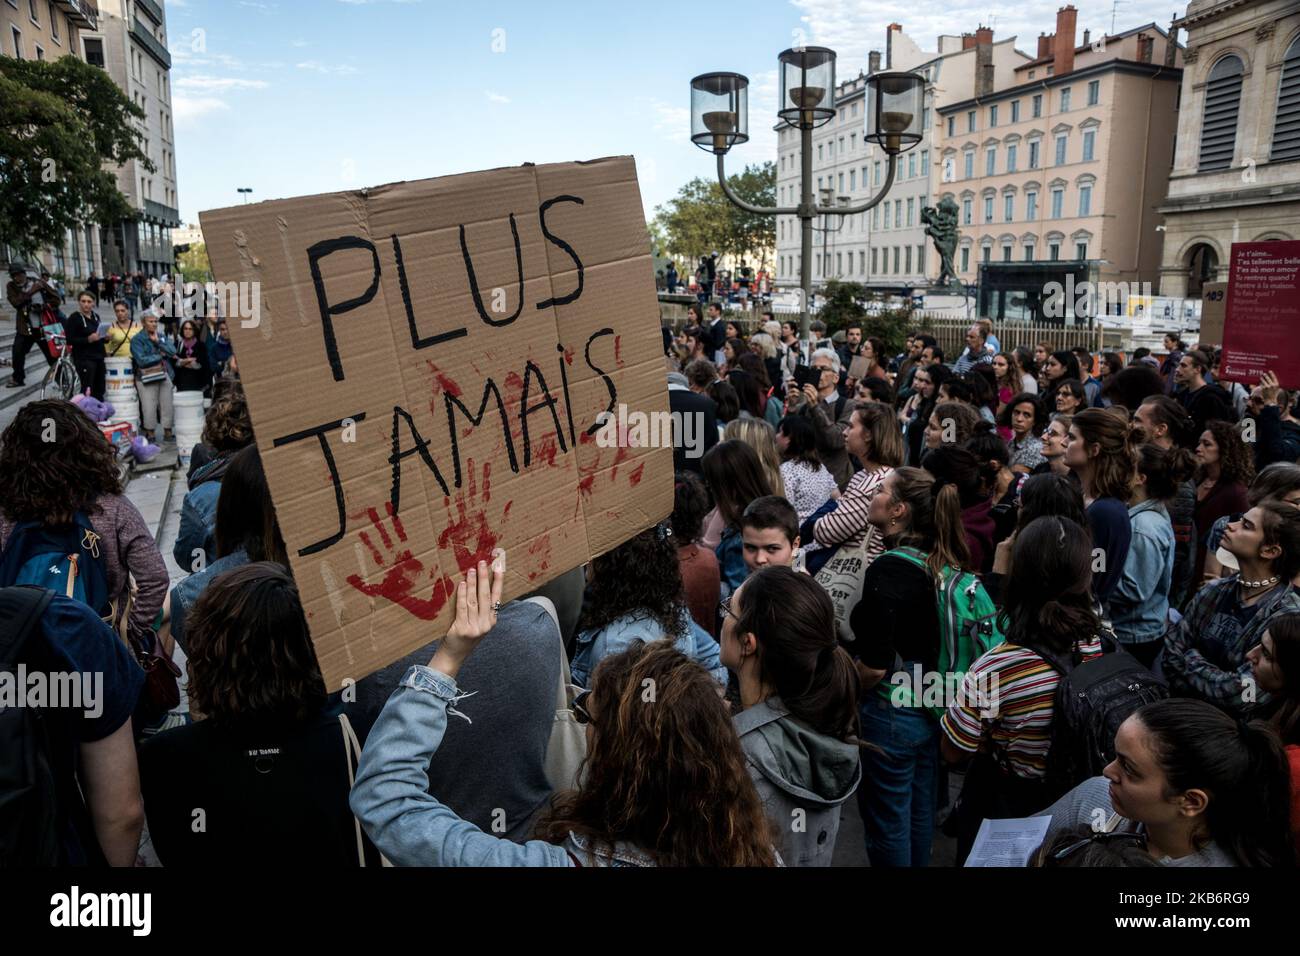 Feminist rally to denounce the 109 murders of women since the beginning of 2019 in France, in Lyon, France, on 23 September 2019. The list of names of the murdered women was unrolled on the place in front of the hundred people gathered for the event. (Photo by Nicolas Liponne/NurPhoto) Stock Photo